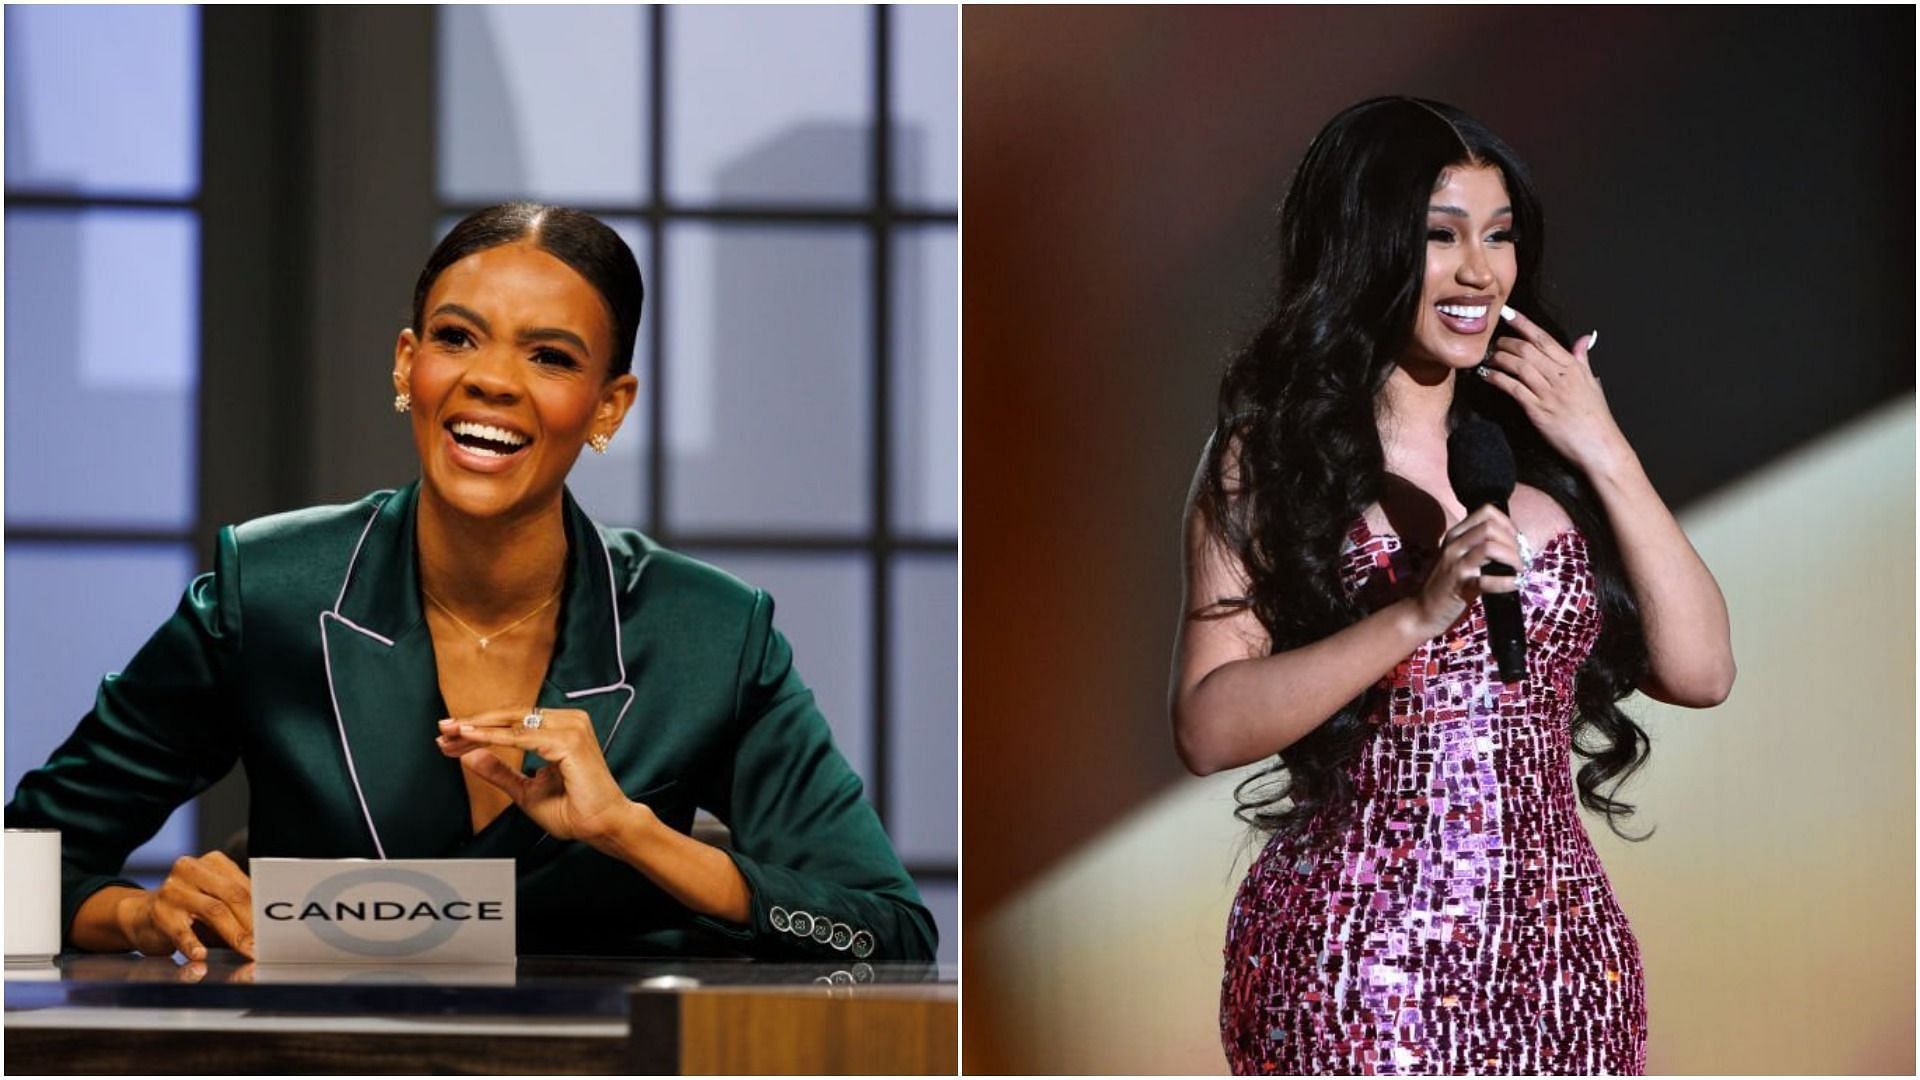 Candace Owens targeted Cardi B while appearing in a podcast, reigniting an old feud (Images via Brett Carlsen and Alberto Rodriguez/Getty Images)